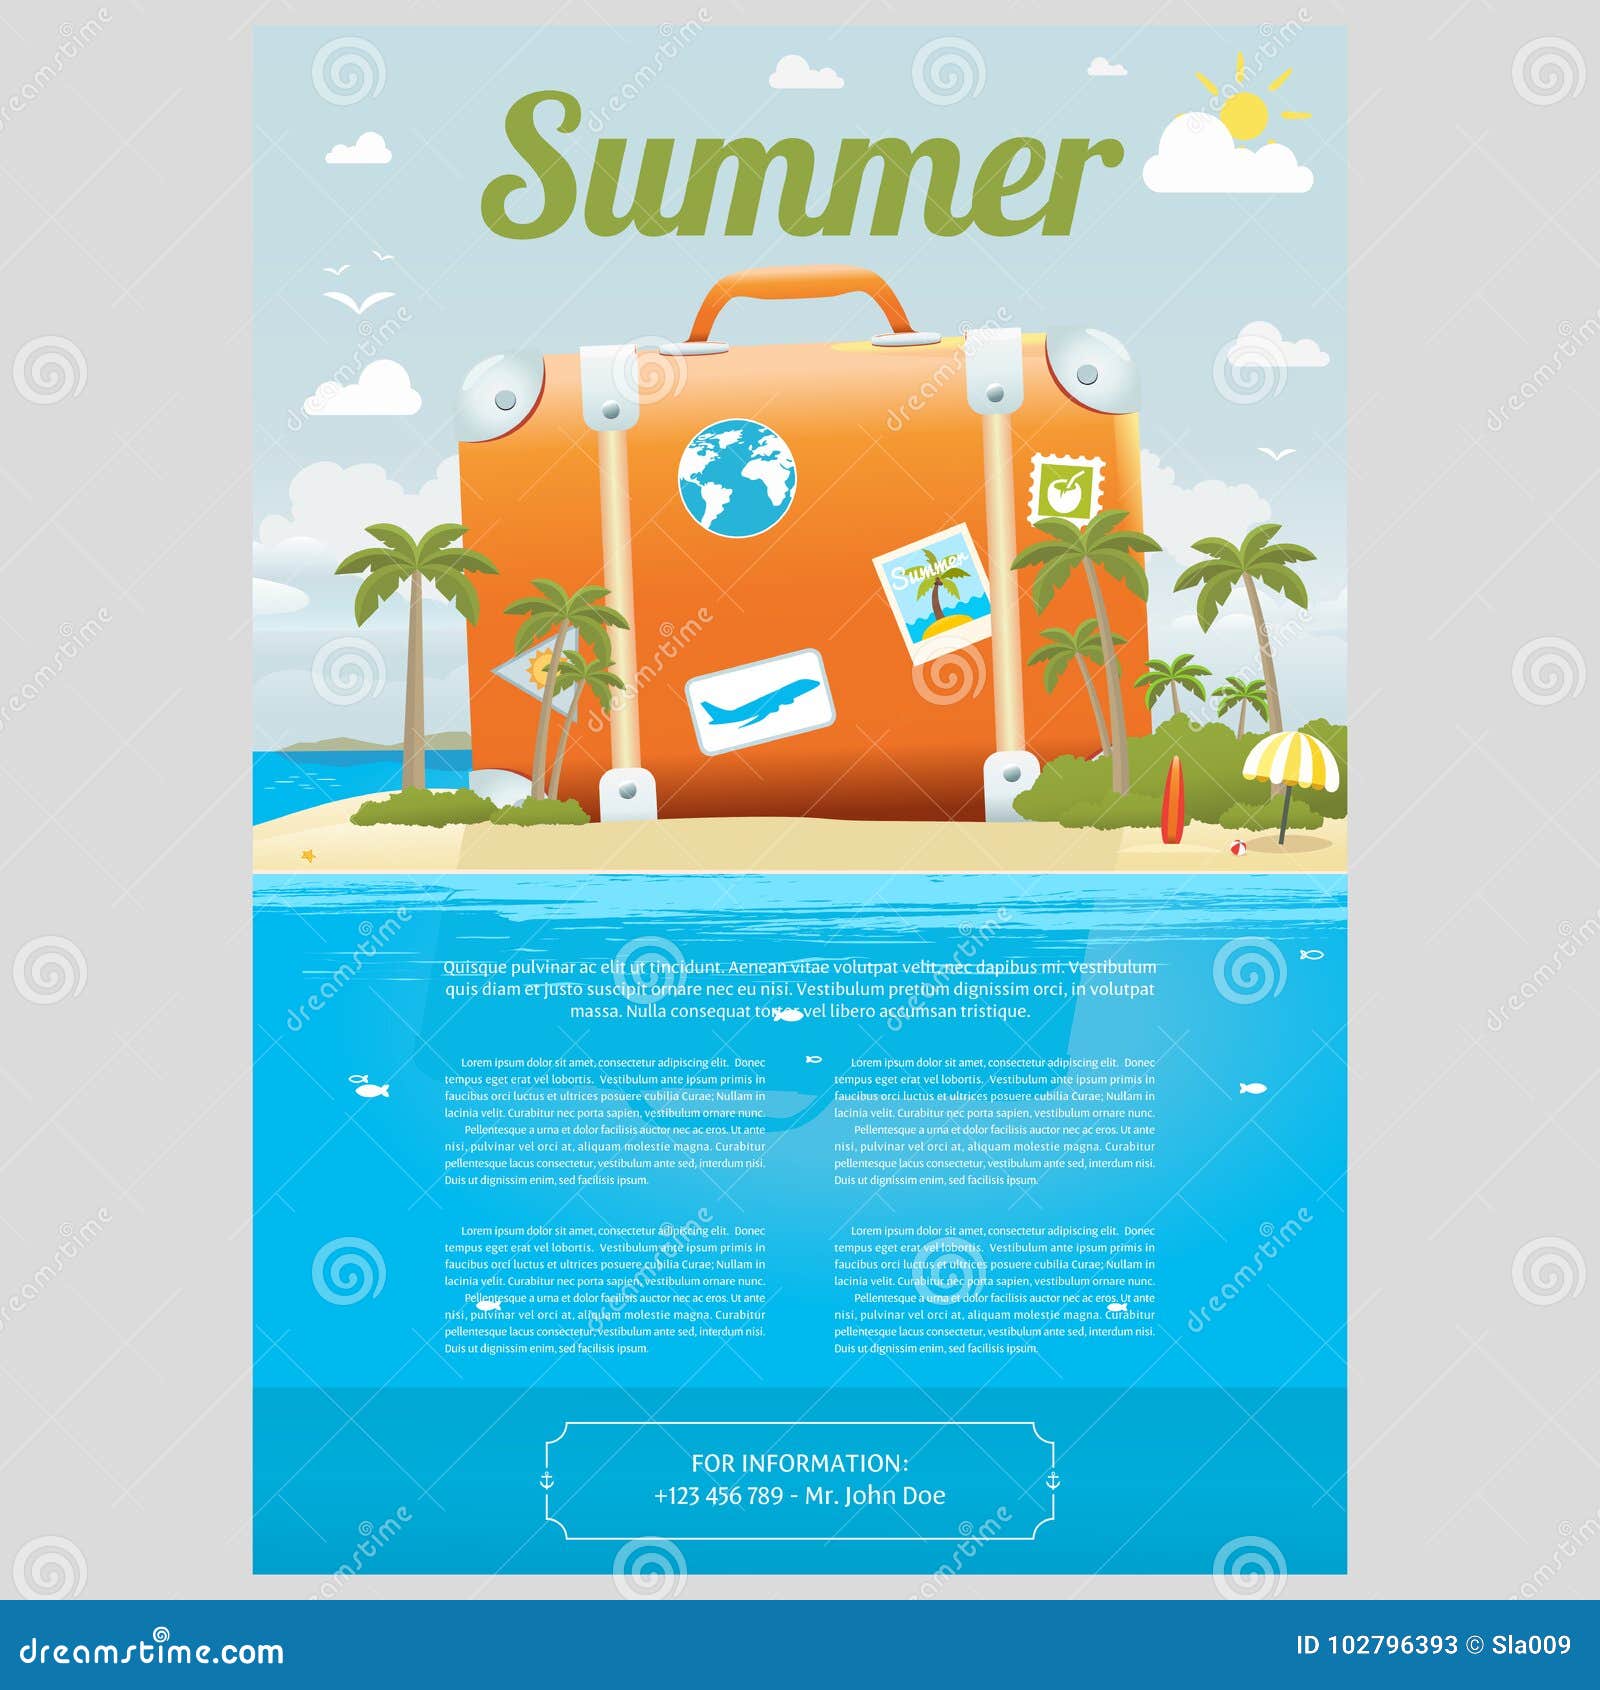 Vector Illustration of Travel Suitcase on the Sea Island Stock In Island Brochure Template